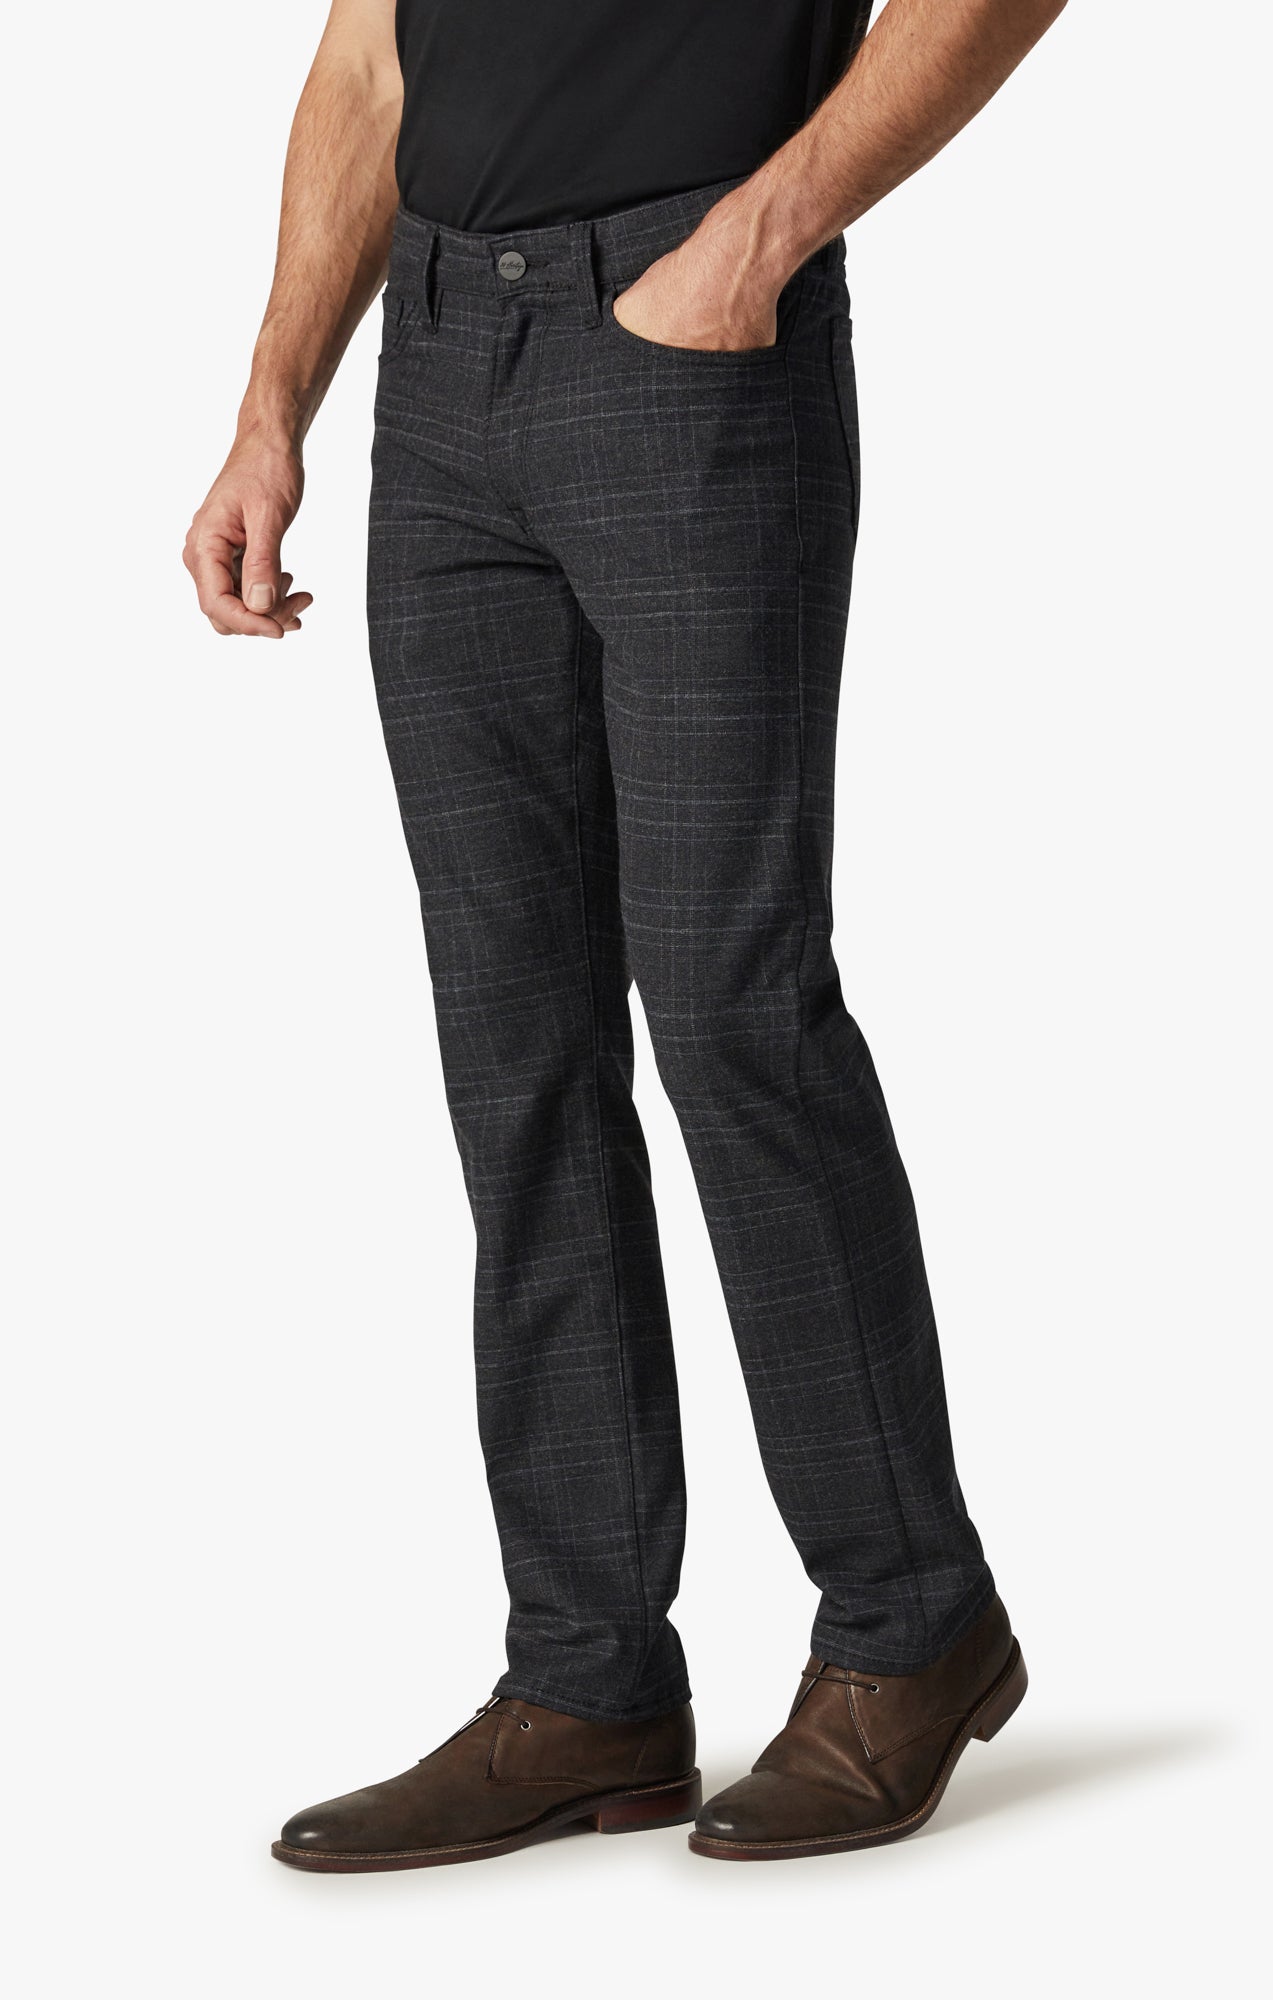 Courage Straight Leg Pants In Grey Checked Image 5